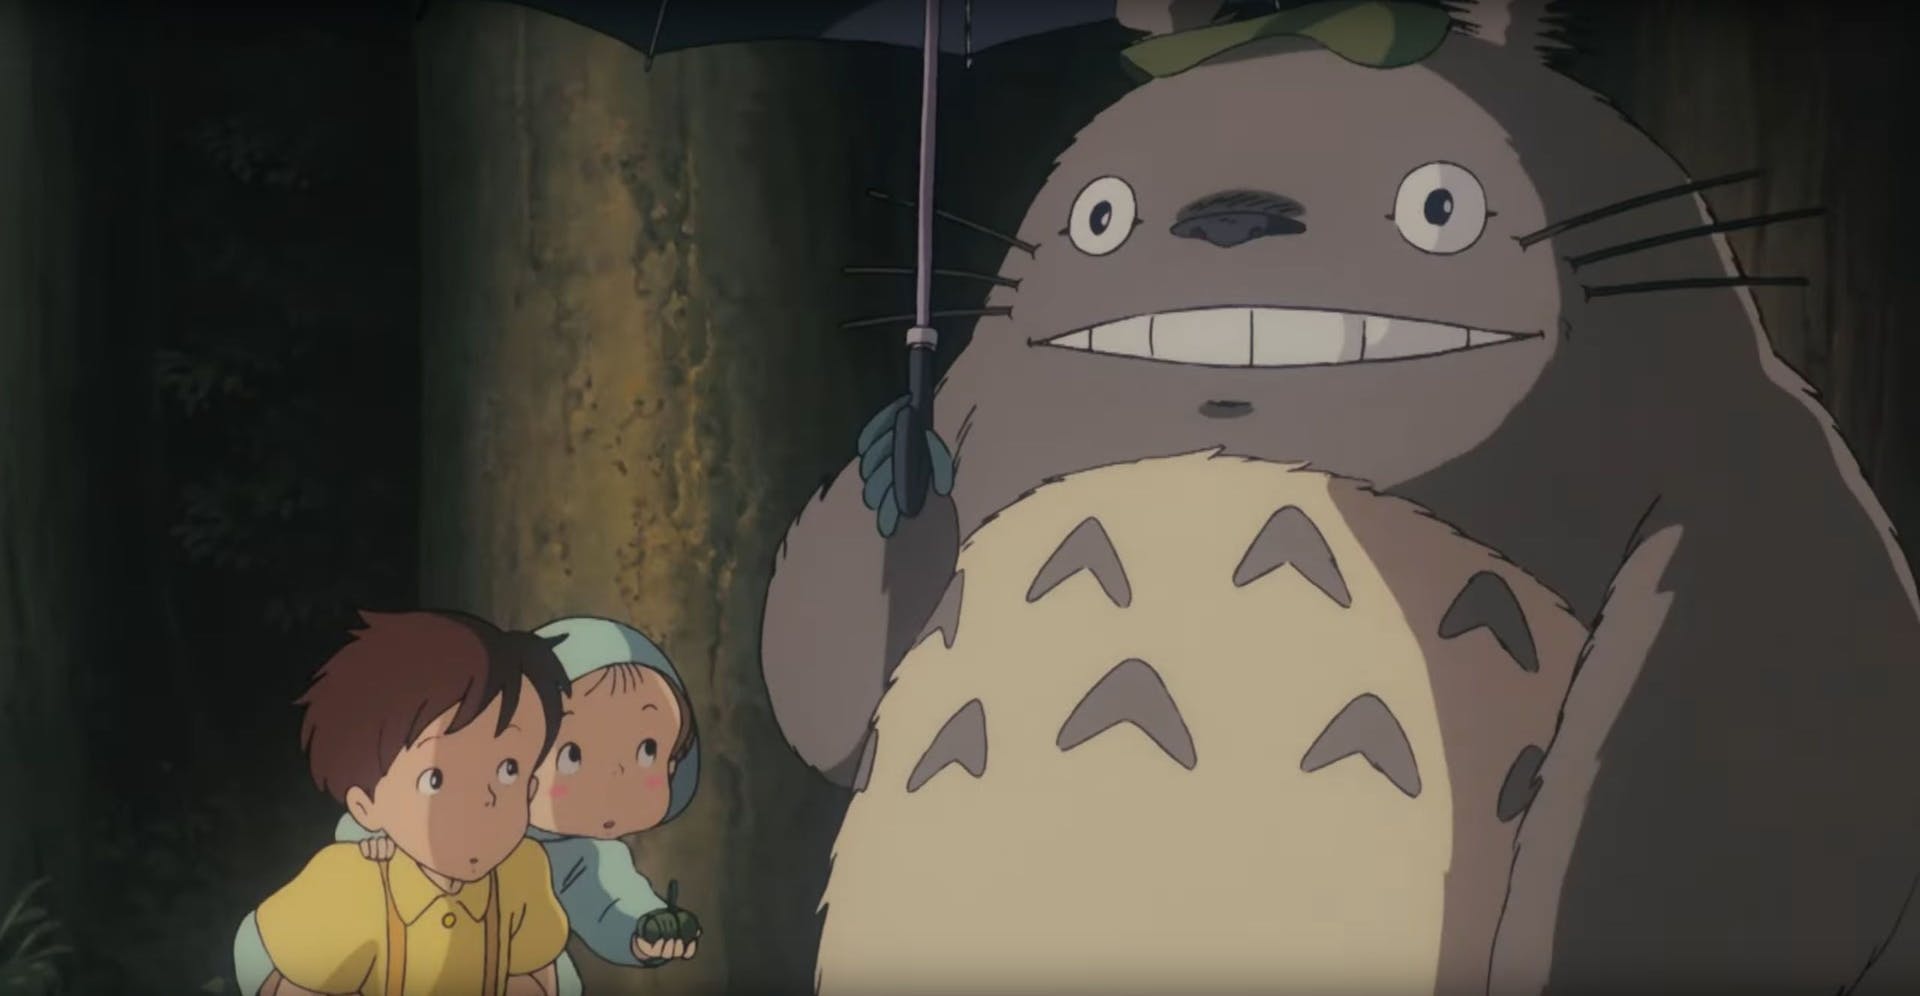 A scene from the film, "My Neighbor, Totoro".